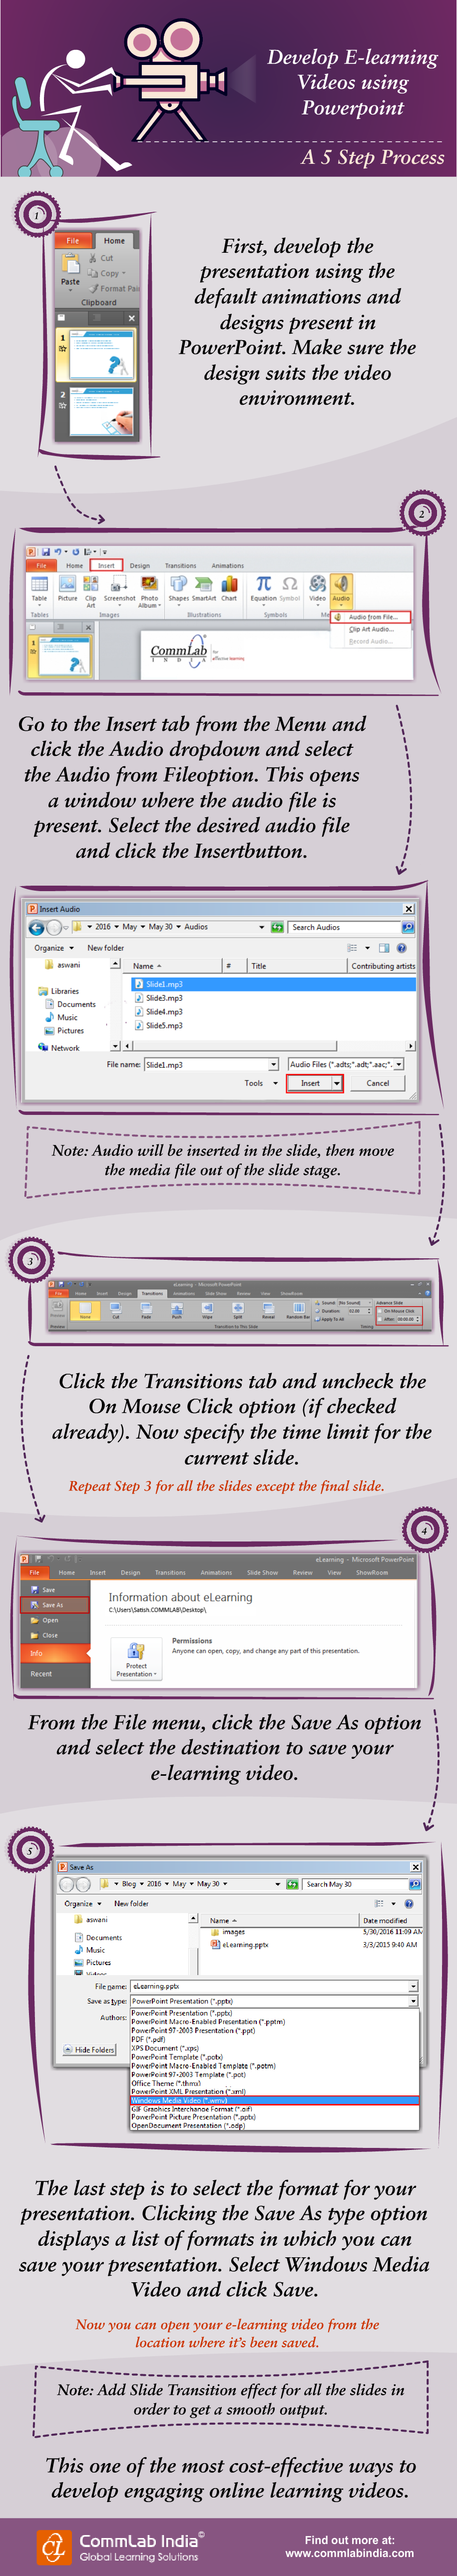 E-learning Videos in PowerPoint - 5 Steps to Achieve this Feat [Infographic]